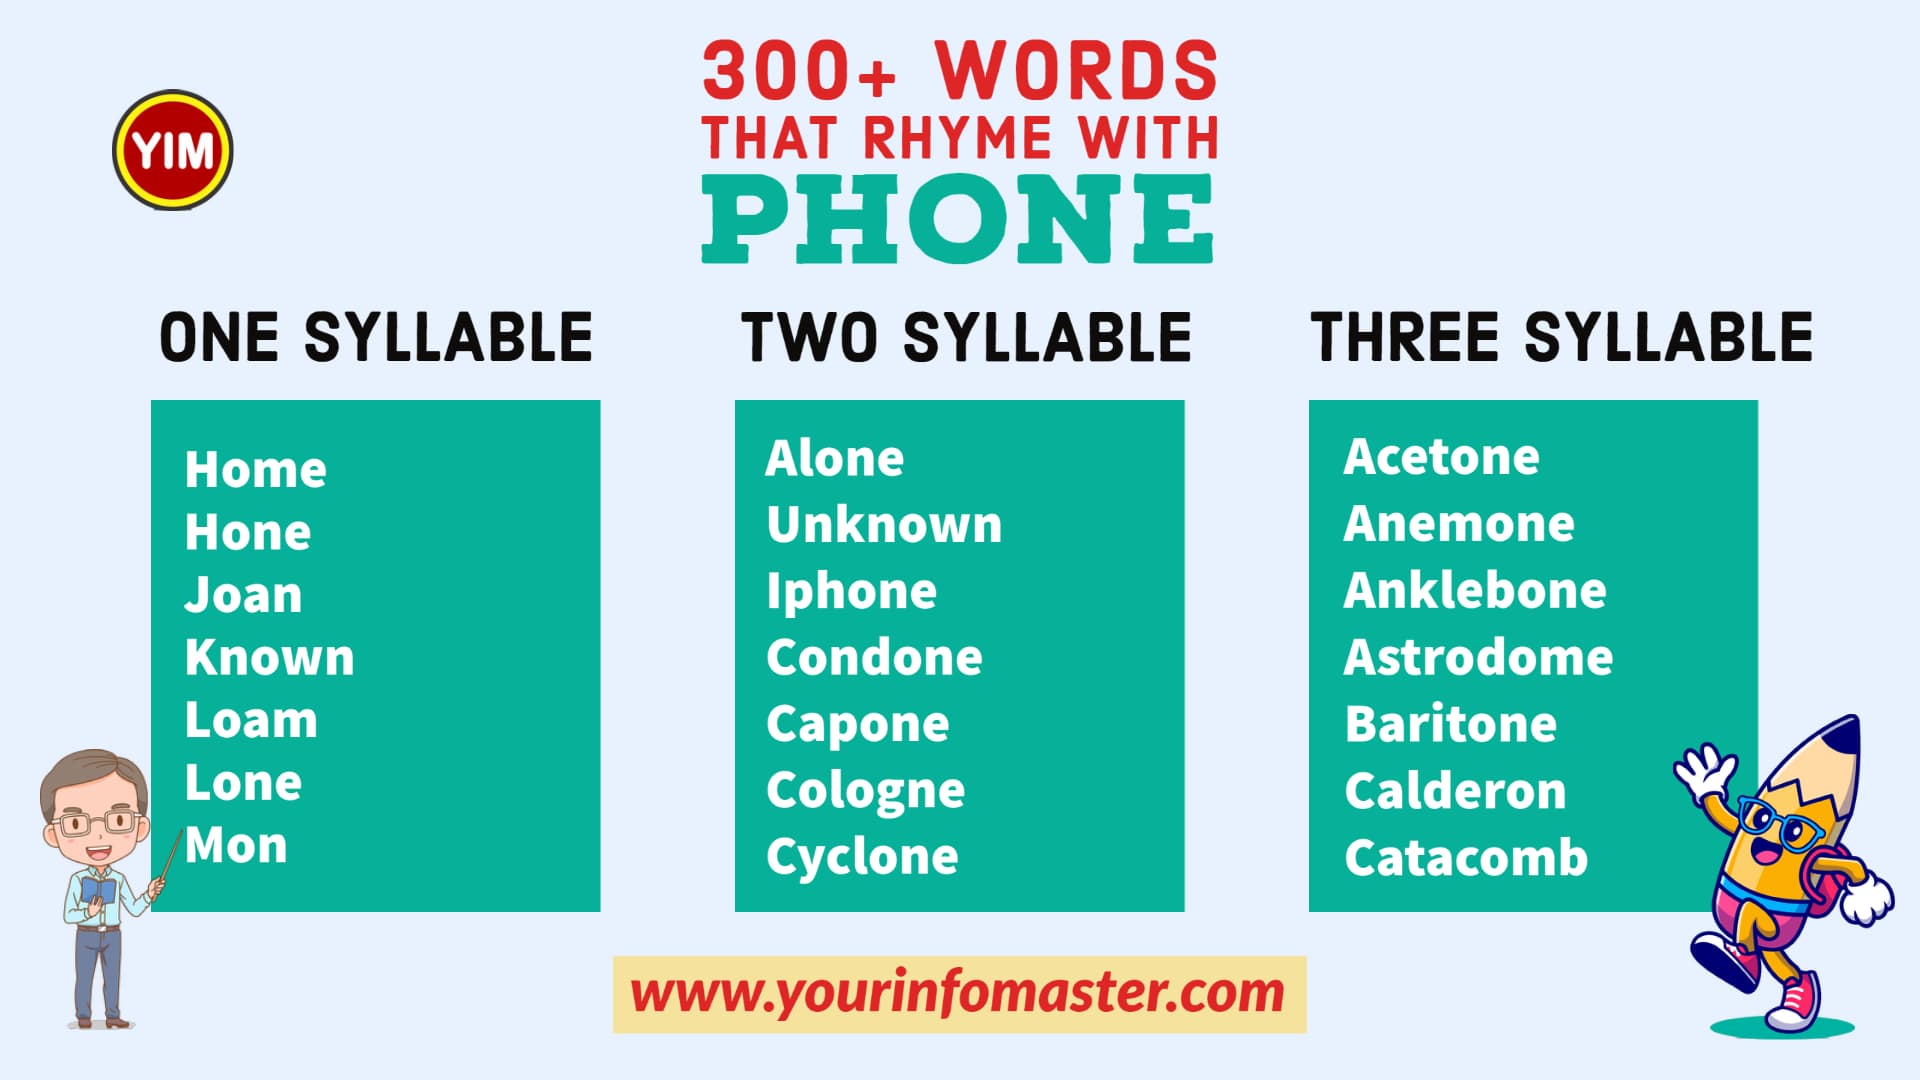 100 rhyming words, 1000 rhyming words, 200+ Interesting Words, 200+ Useful Words, 300 rhyming words list, 50 rhyming words list, 500 rhyming words, all words that rhyme with Phone, are rhyming words, how to teach rhyming words, Interesting Words that Rhyme in English, Phone rhyme, Phone rhyme examples, Phone Rhyming words, Printable Infographics, Printable Worksheets, rhymes English words, rhymes with Phone infographics, rhyming pairs, Rhyming Words, Rhyming Words for Kids, rhyming words for Phone, Rhyming Words List, what are rhyming words, what rhymes with Phone, words rhyming with Phone, Words that Rhyme, Words That Rhyme with Phone